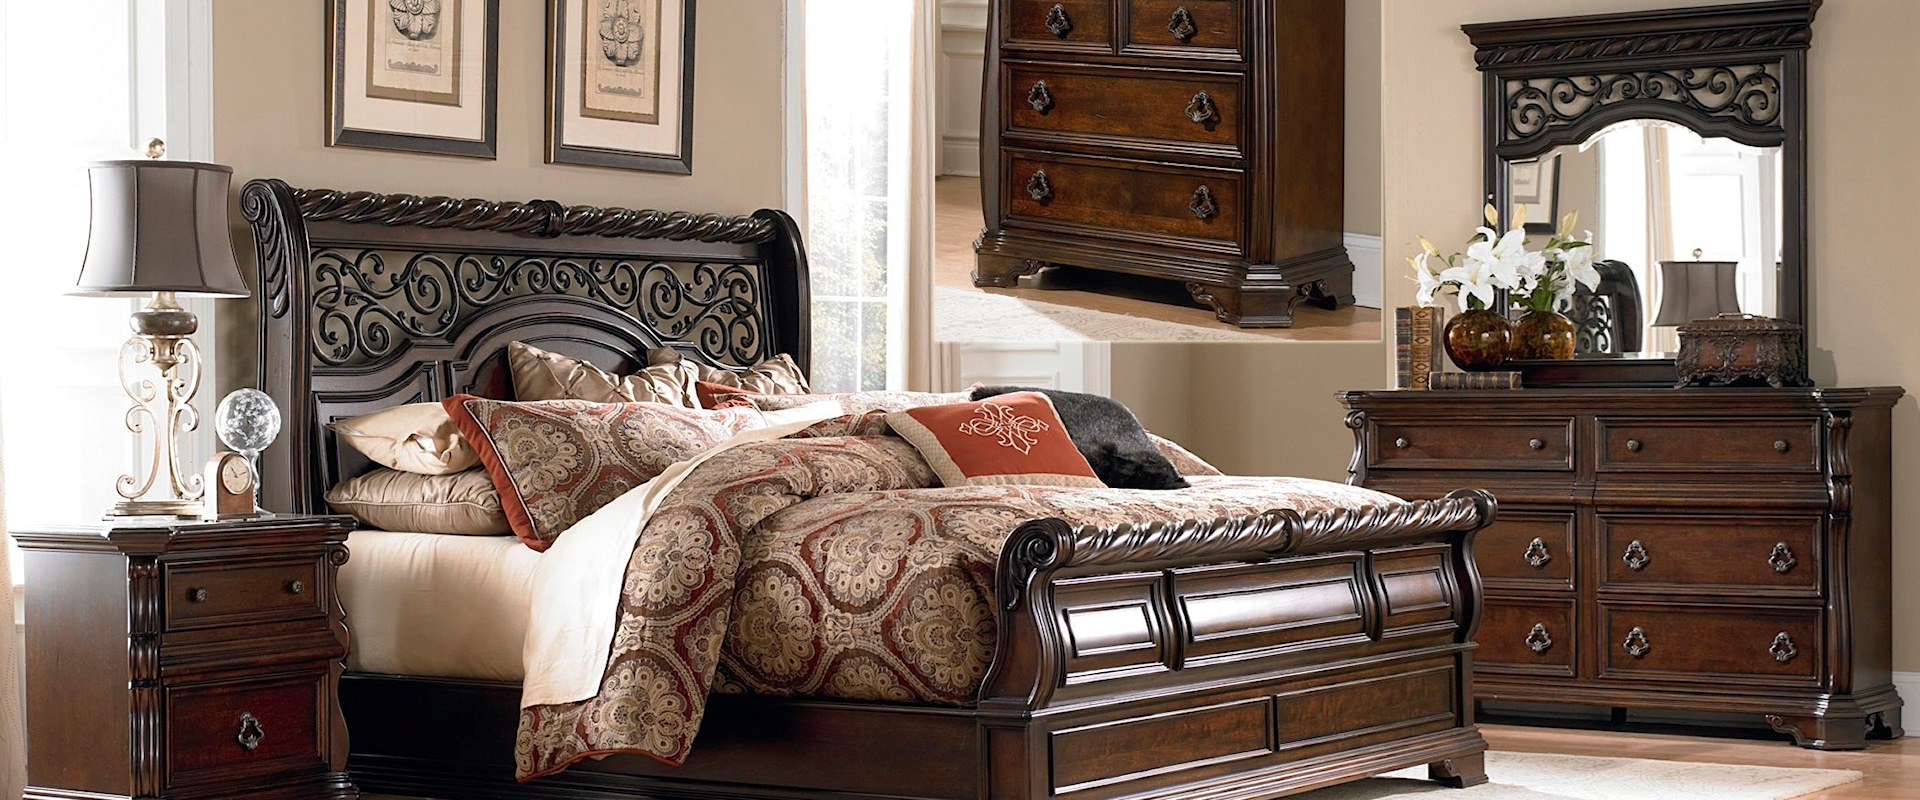 Traditional 5-Piece King Bedroom Set with Felt Lined Drawers